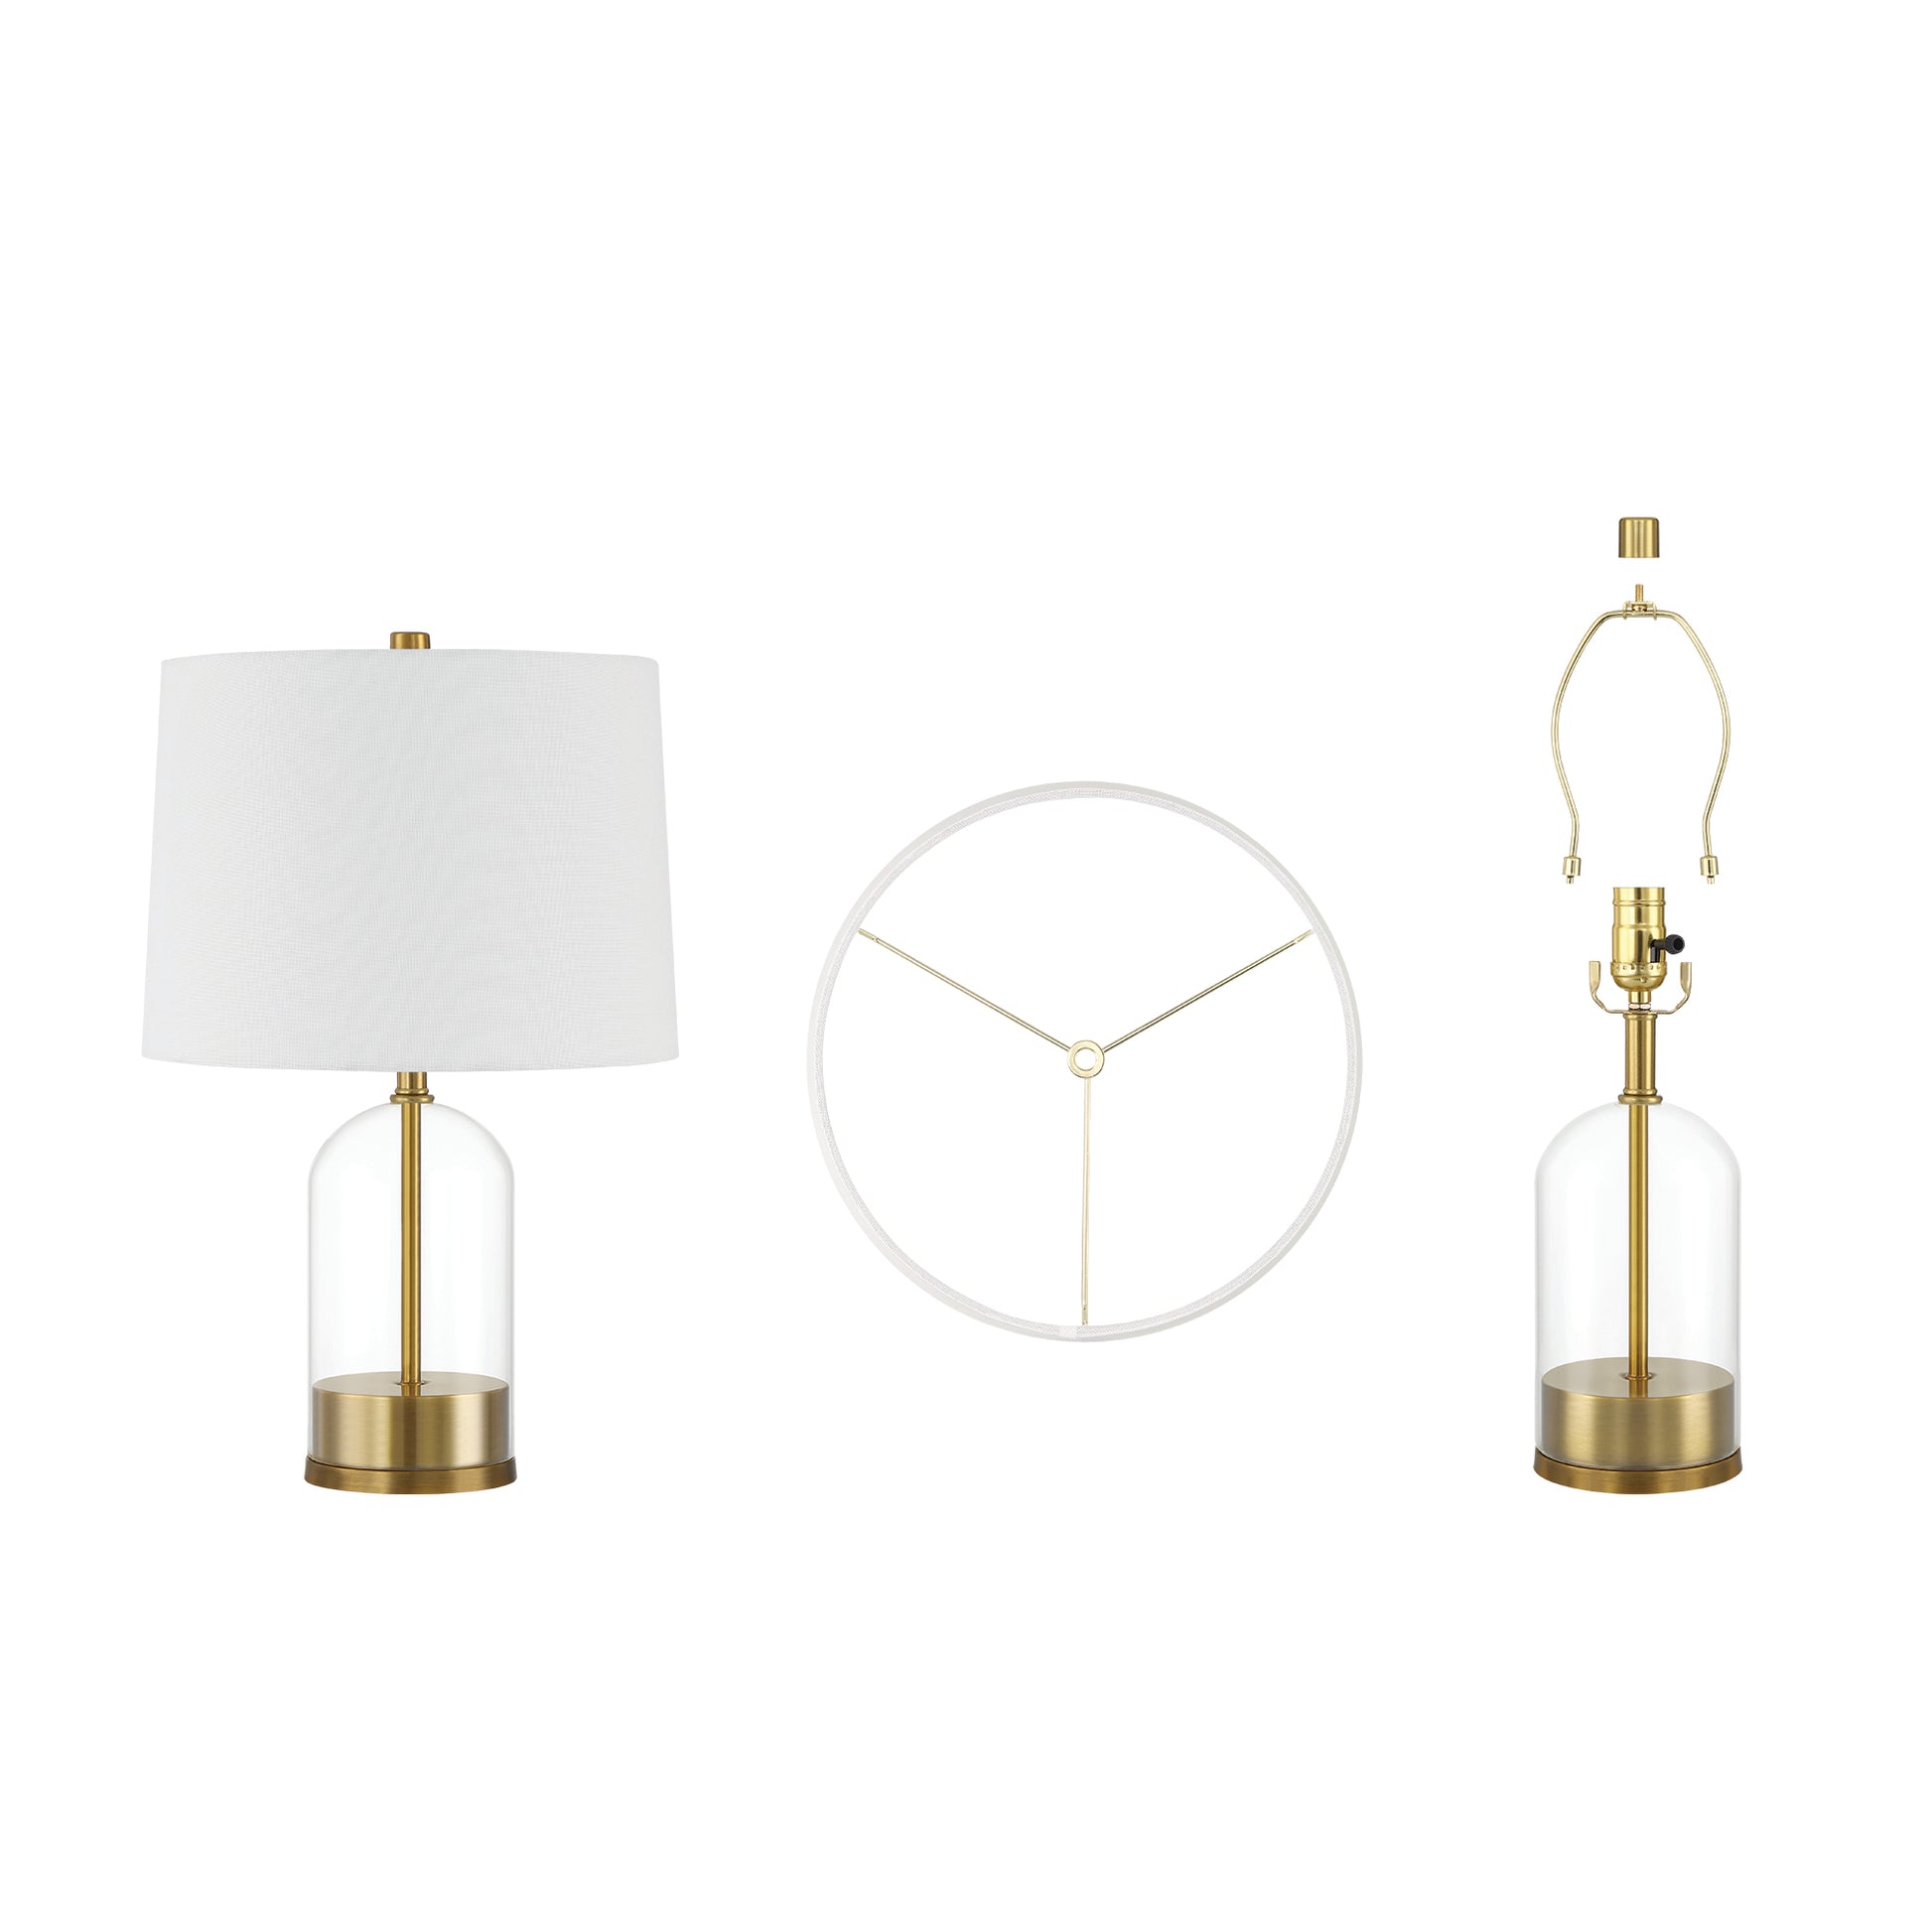 1 light golden table lamp set of 2 (6) by ACROMA